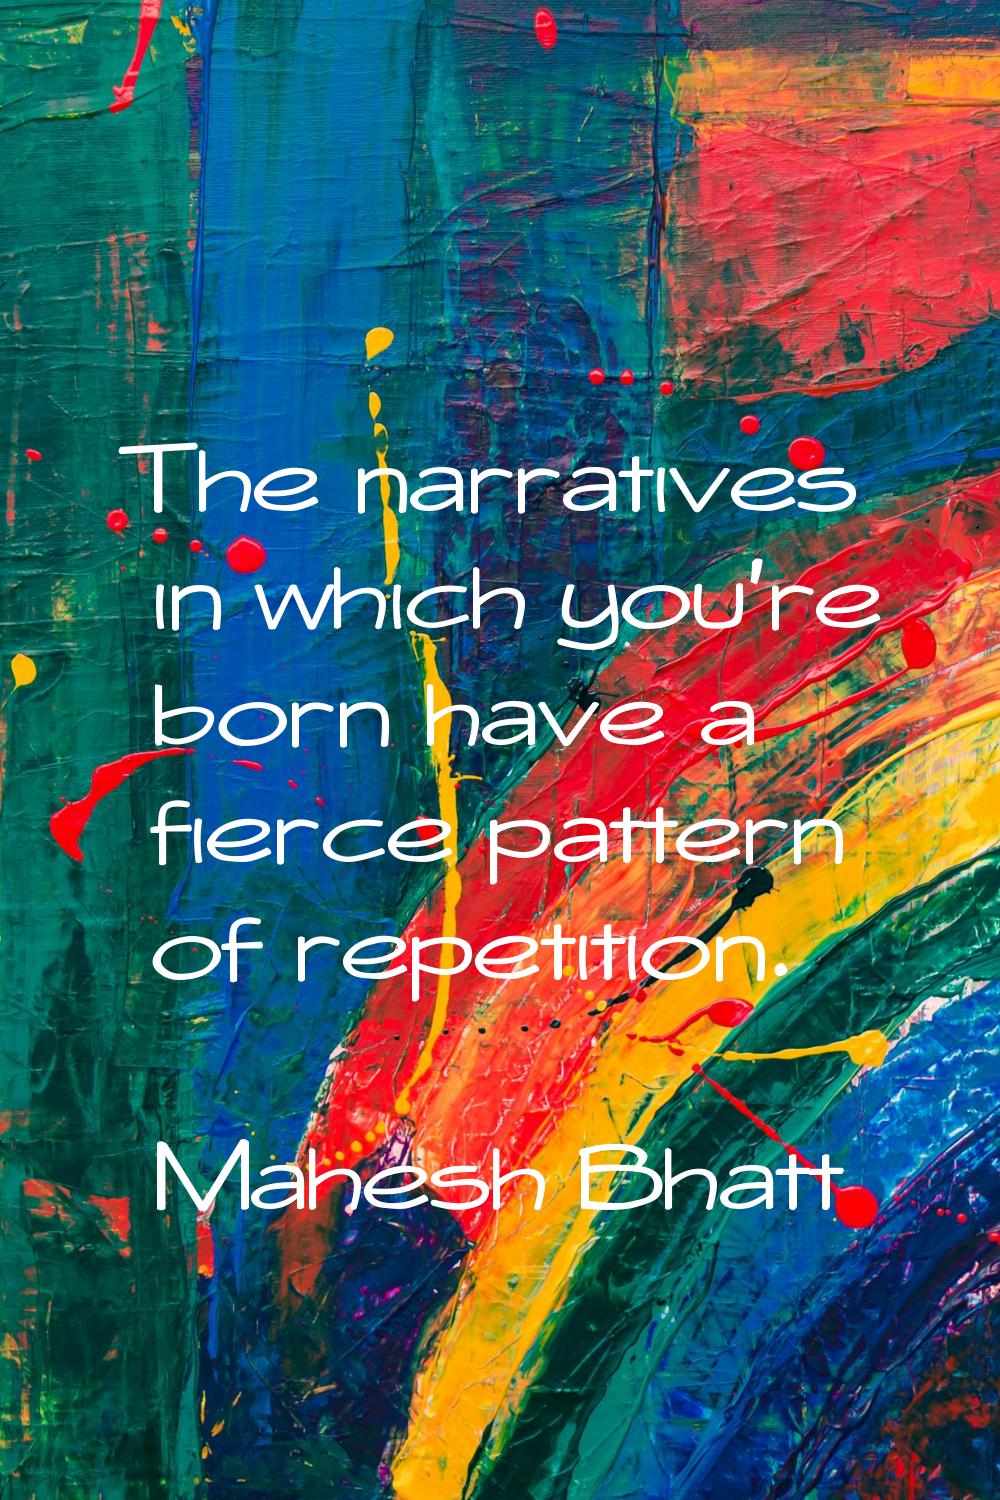 The narratives in which you're born have a fierce pattern of repetition.